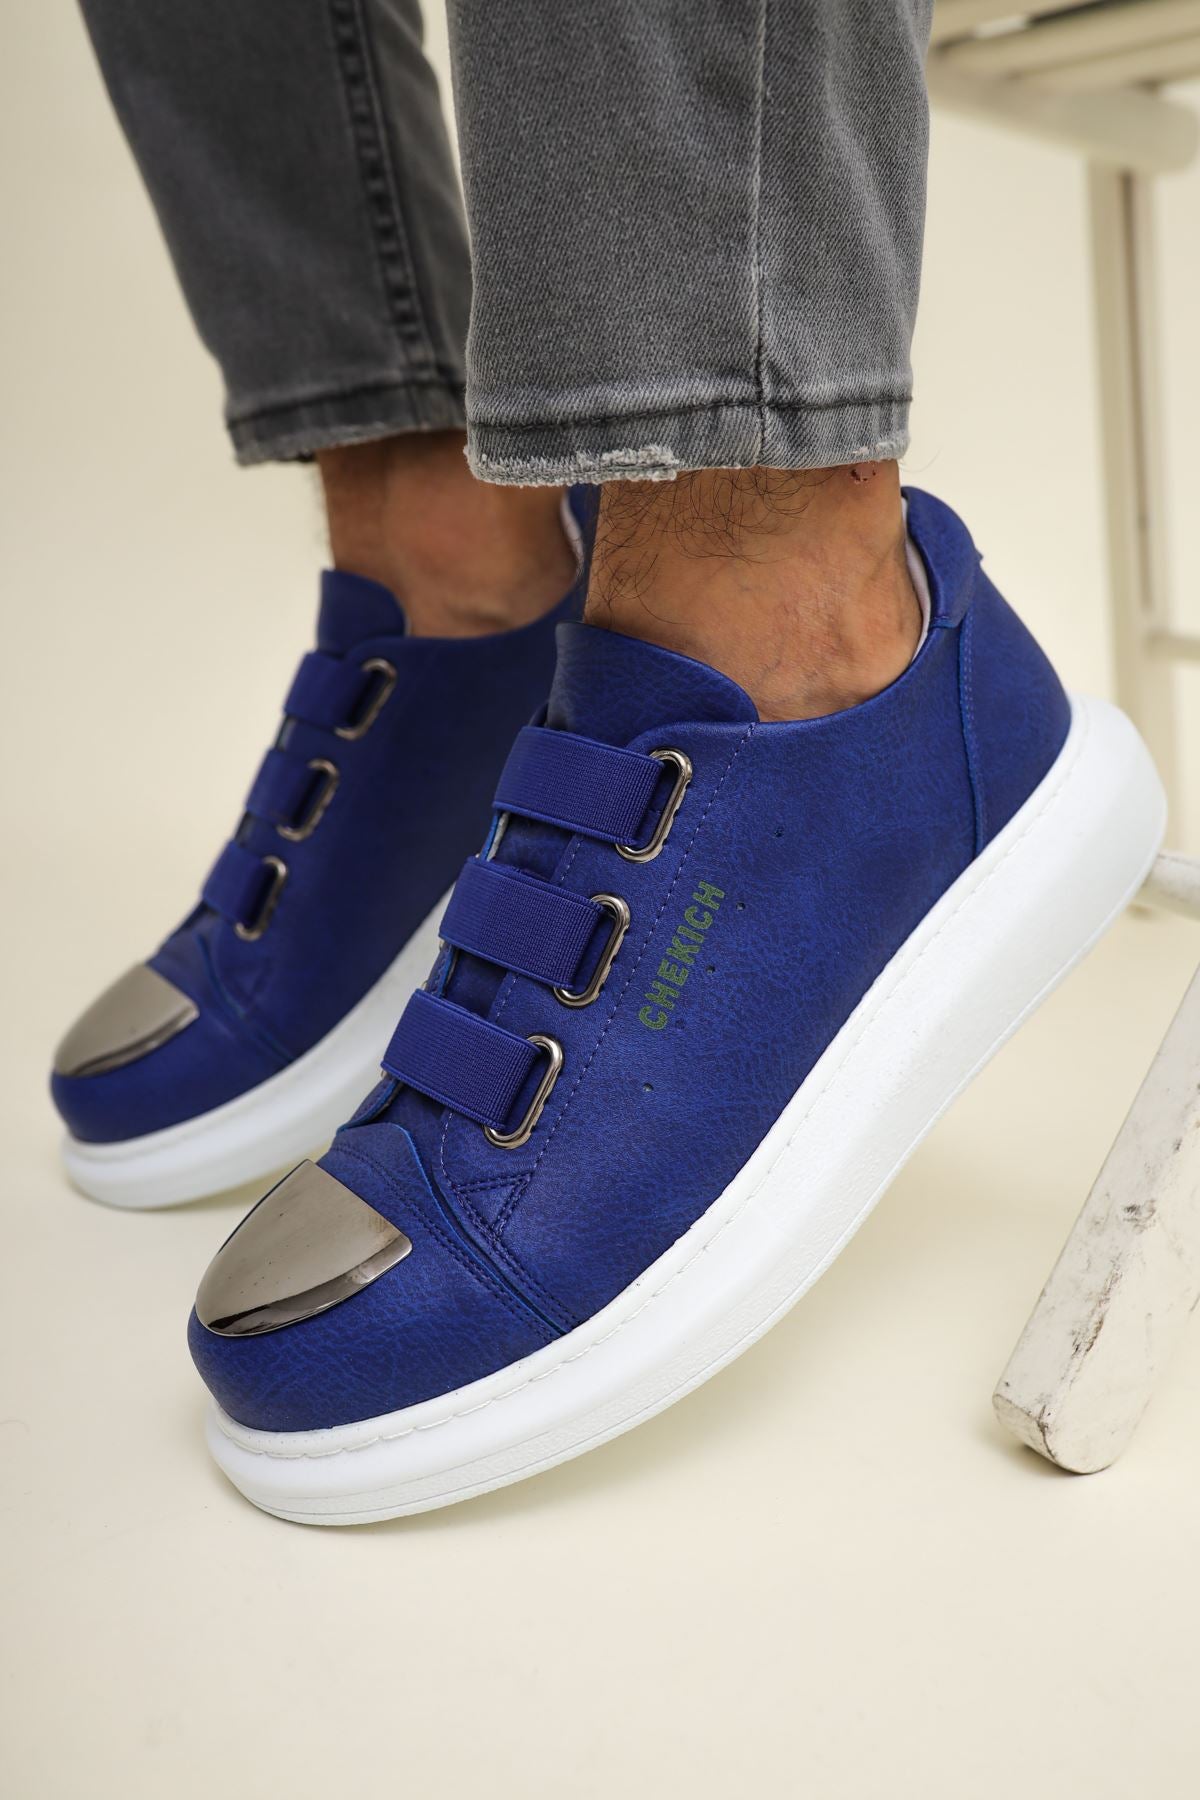 CH251 BT Men's Sneakers Shoes Sax Blue - STREETMODE™